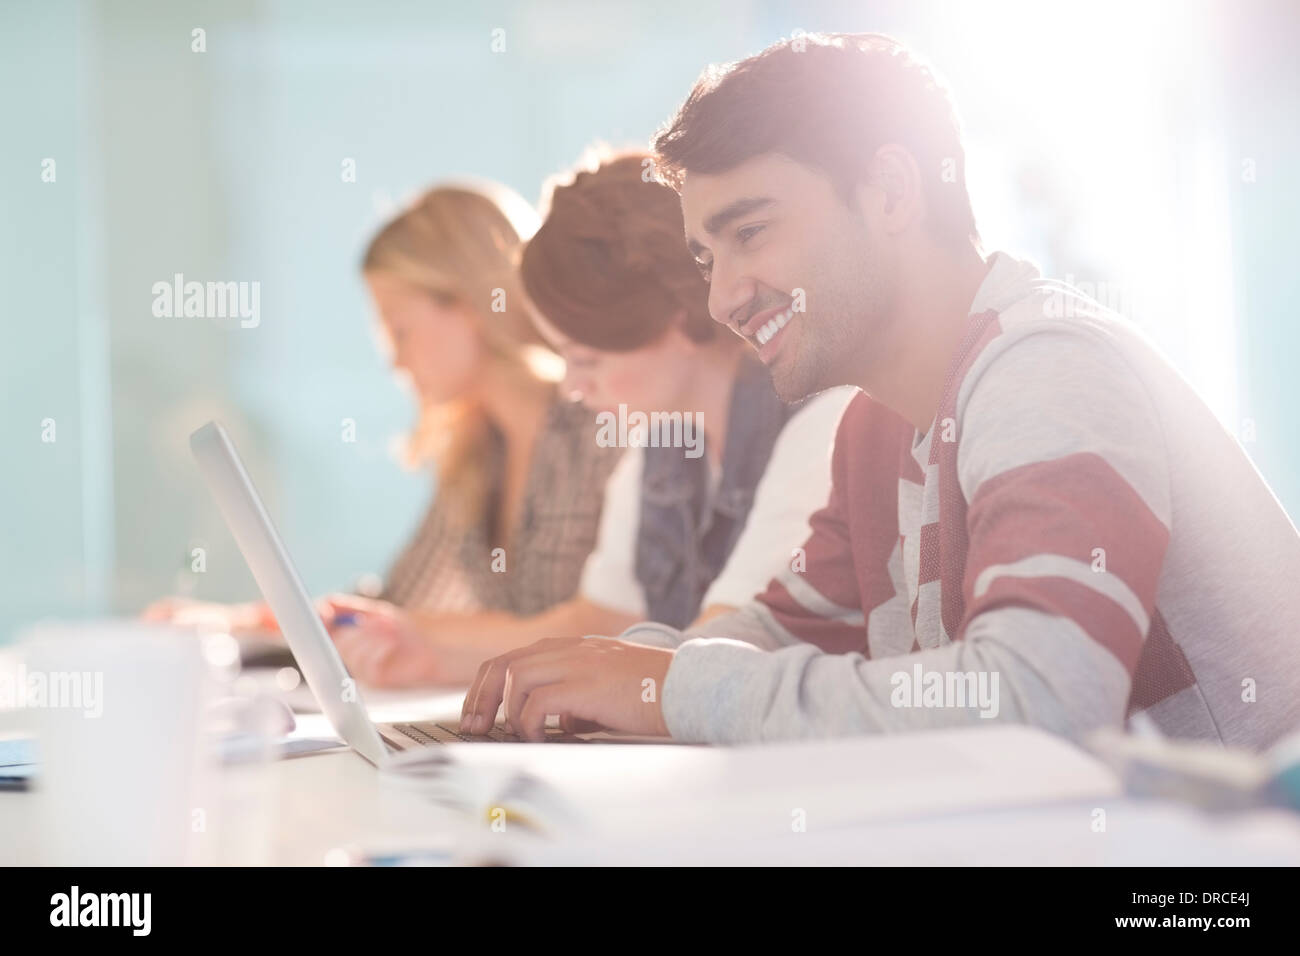 University Student using laptop in classroom Banque D'Images